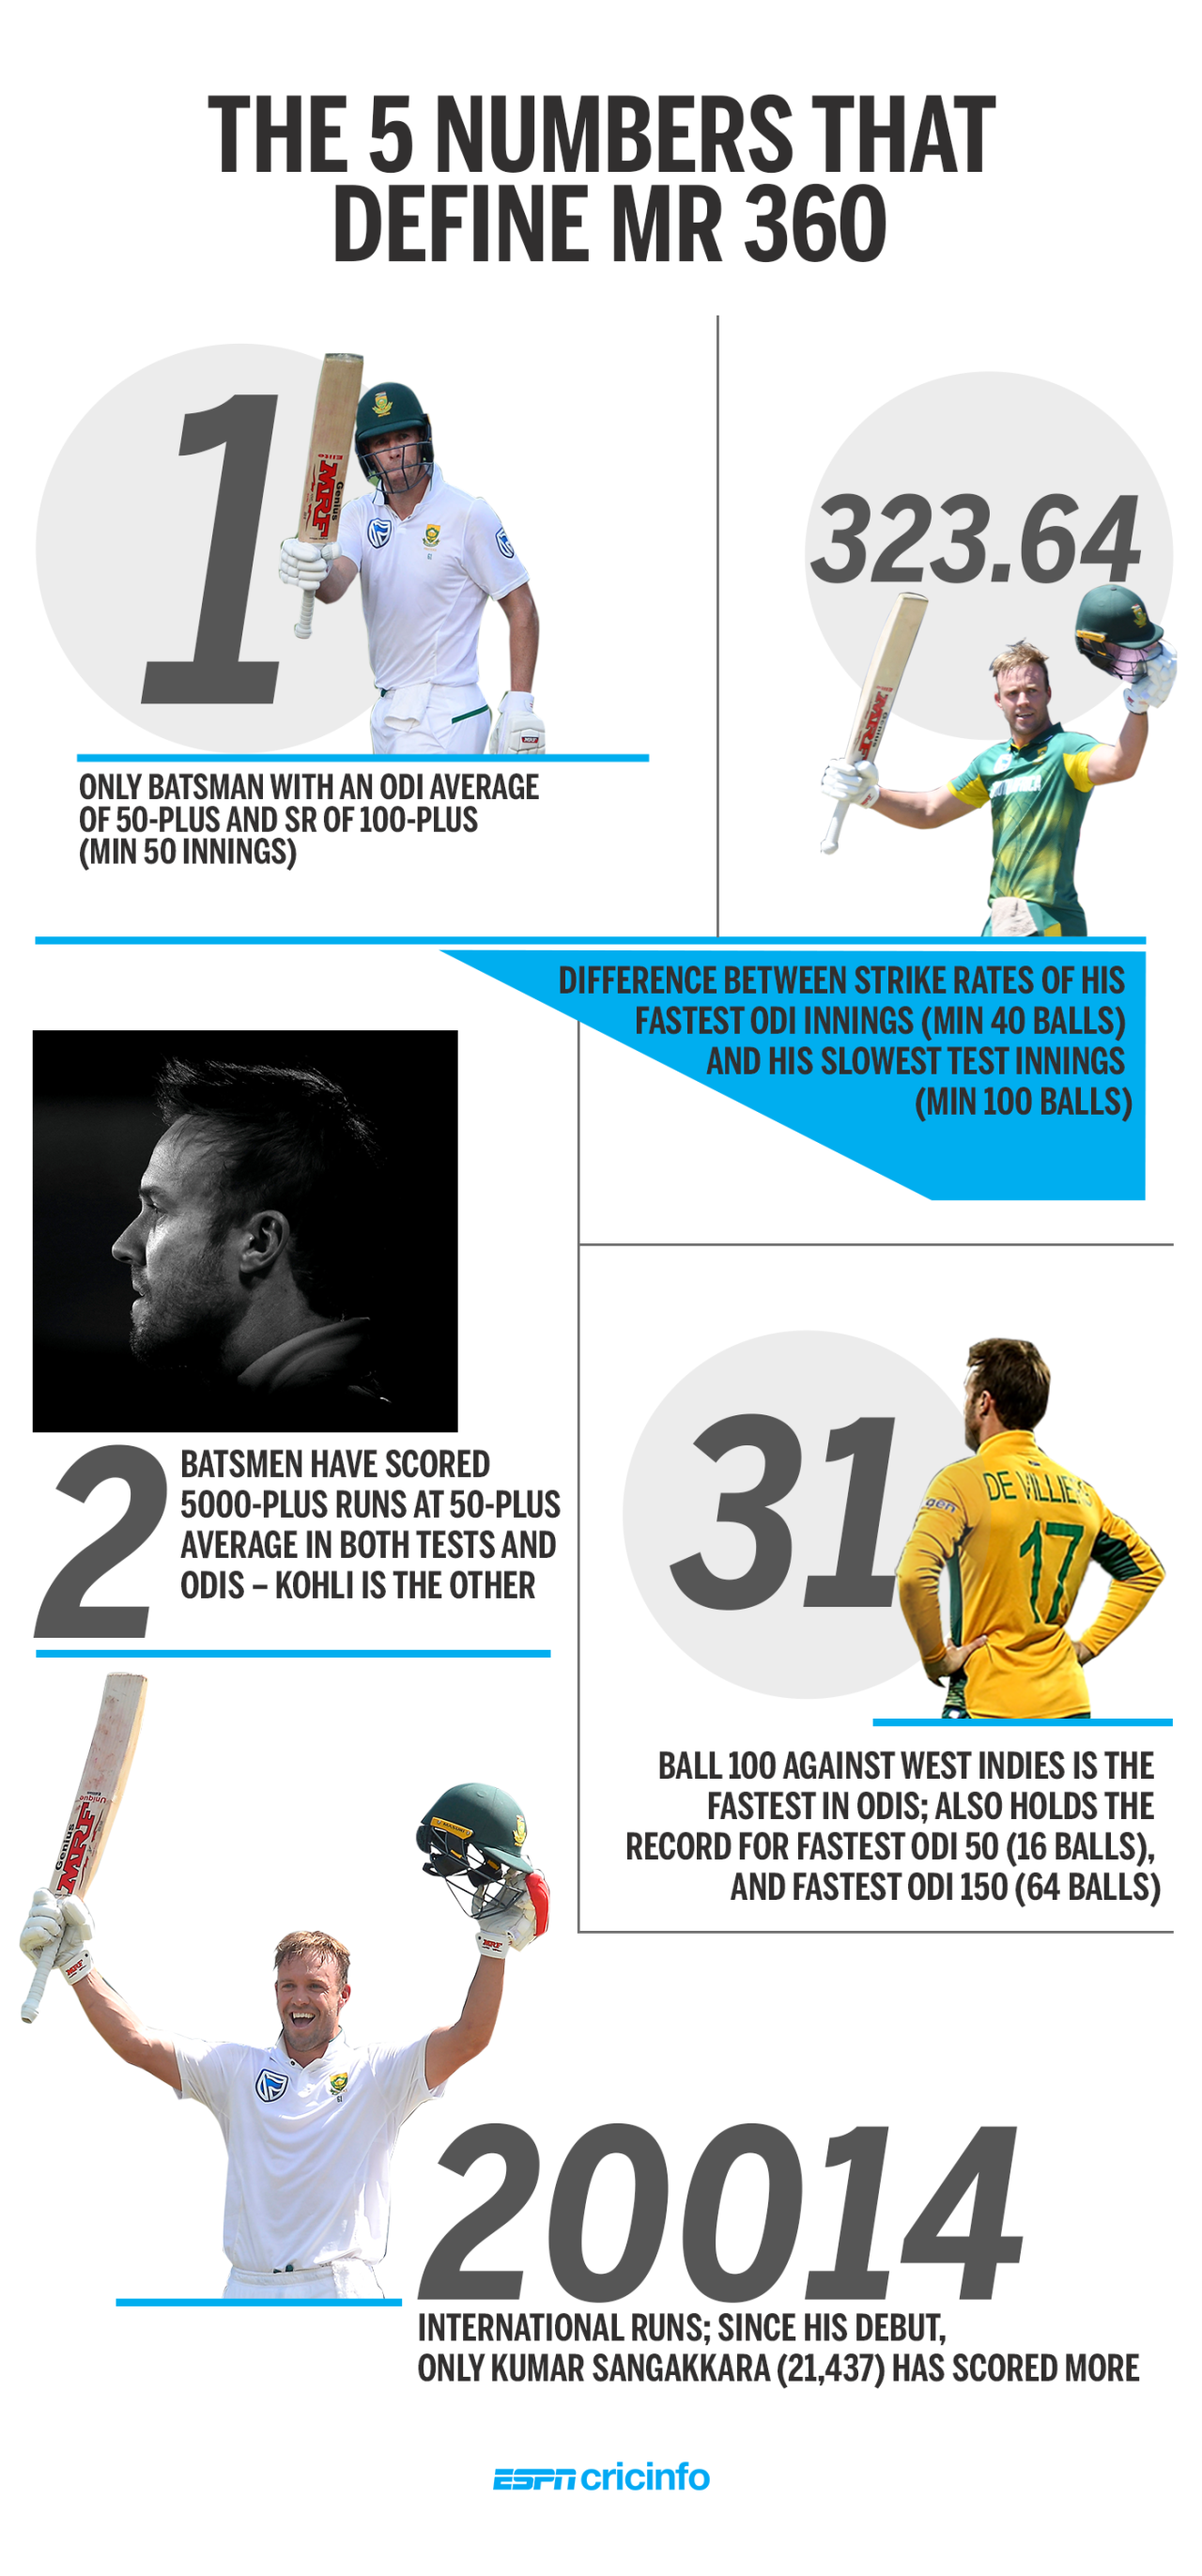 Graphic: Five defining numbers from AB de Villiers' career, May 23, 2018